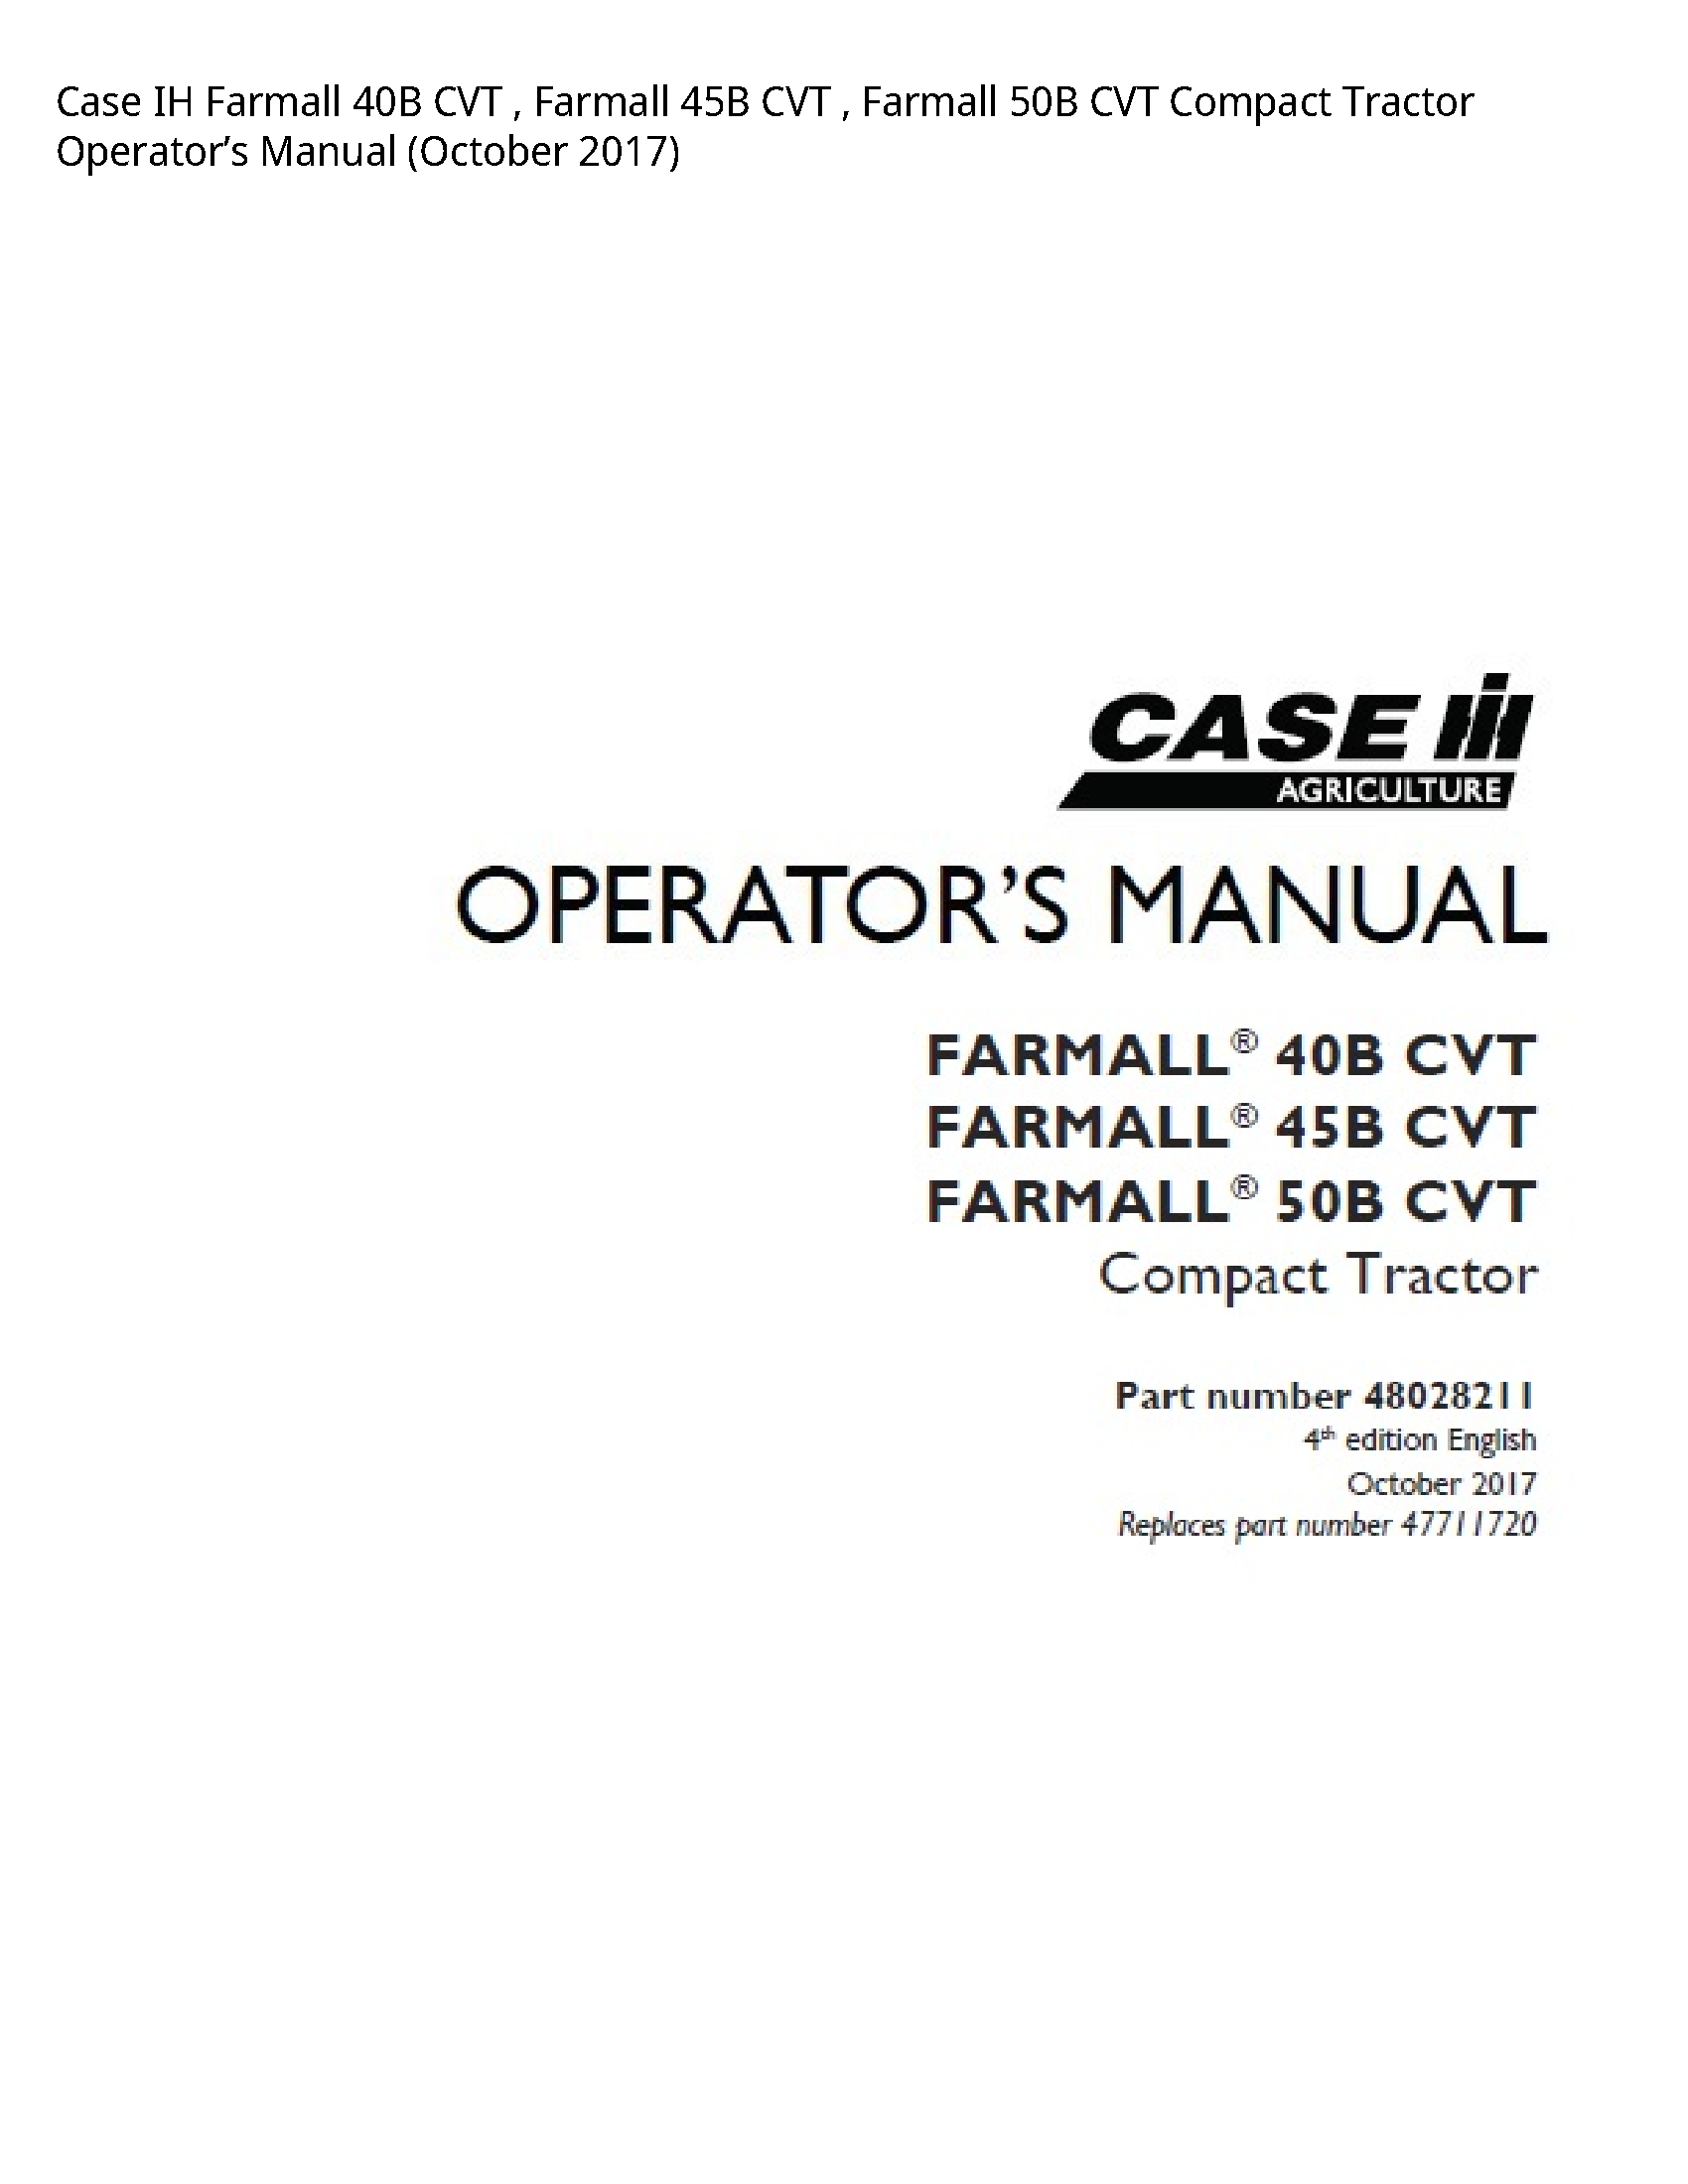 Case/Case IH 40B IH Farmall CVT Farmall CVT Farmall CVT Compact Tractor Operator’s manual